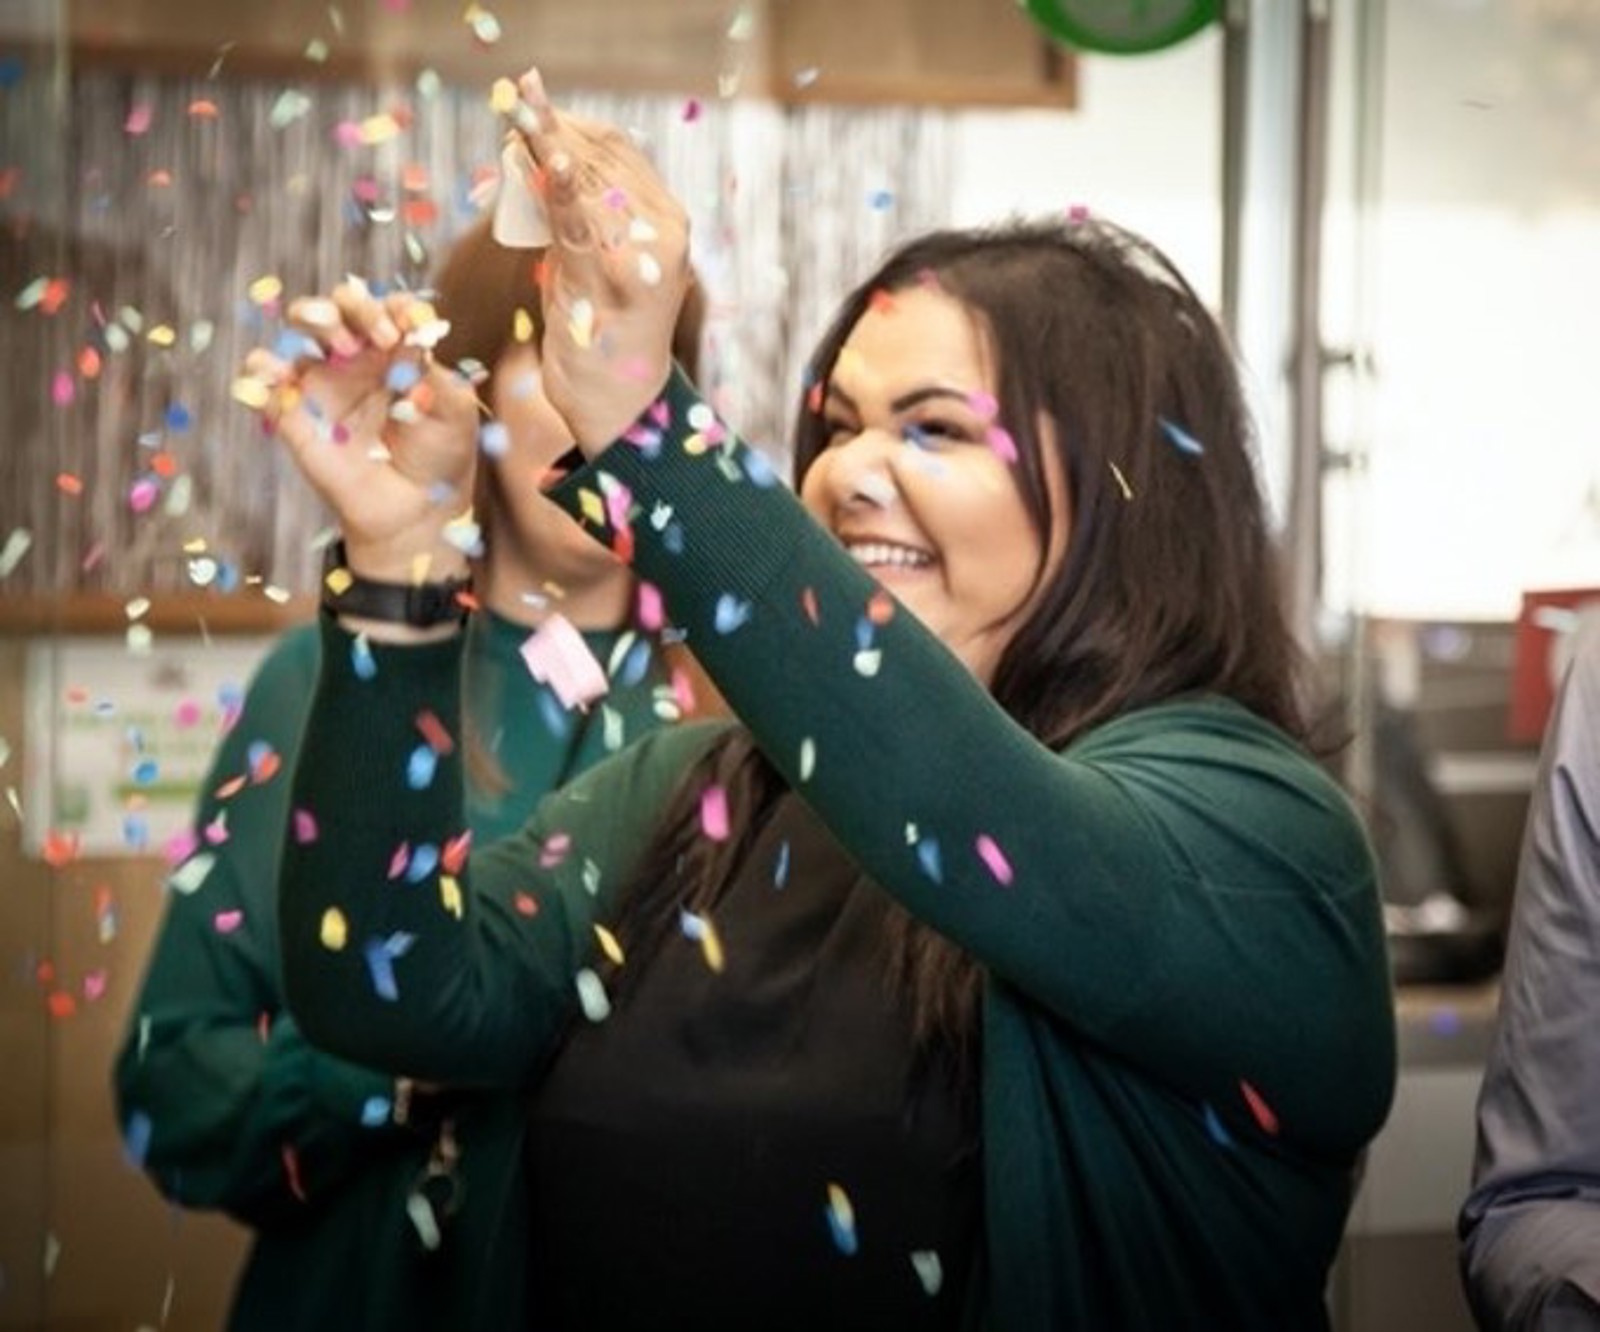 Woman with confetti from a party popper